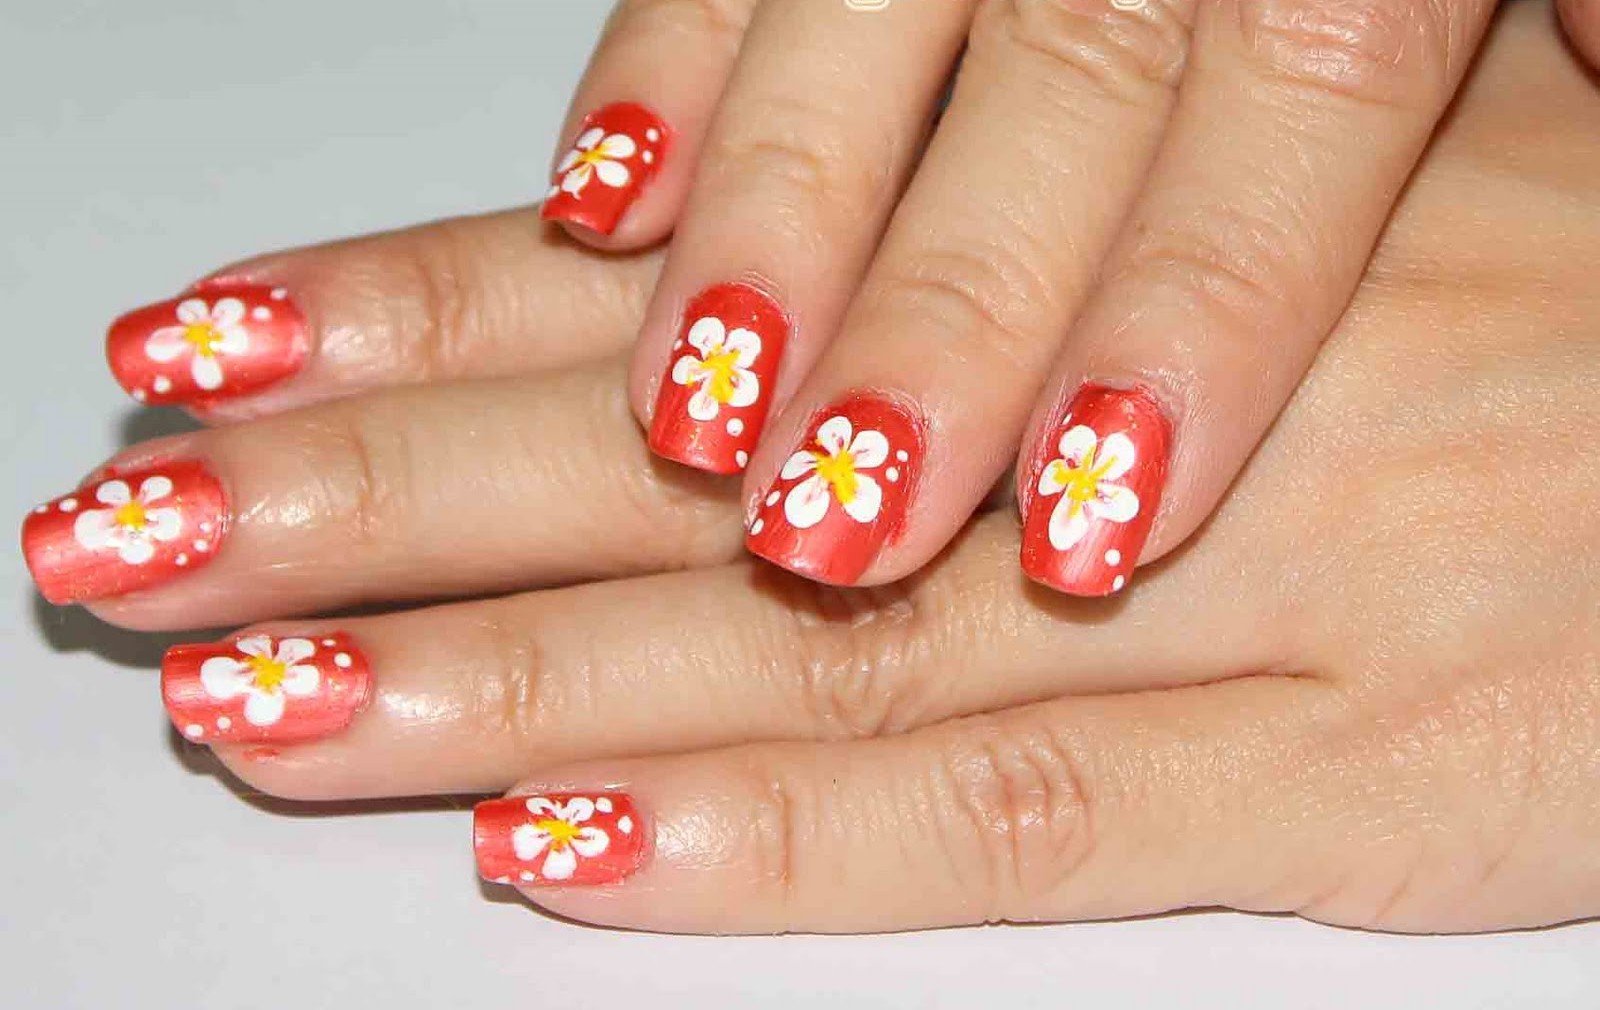 6. "Nail Art Tutorial Videos" Facebook page - wide 4